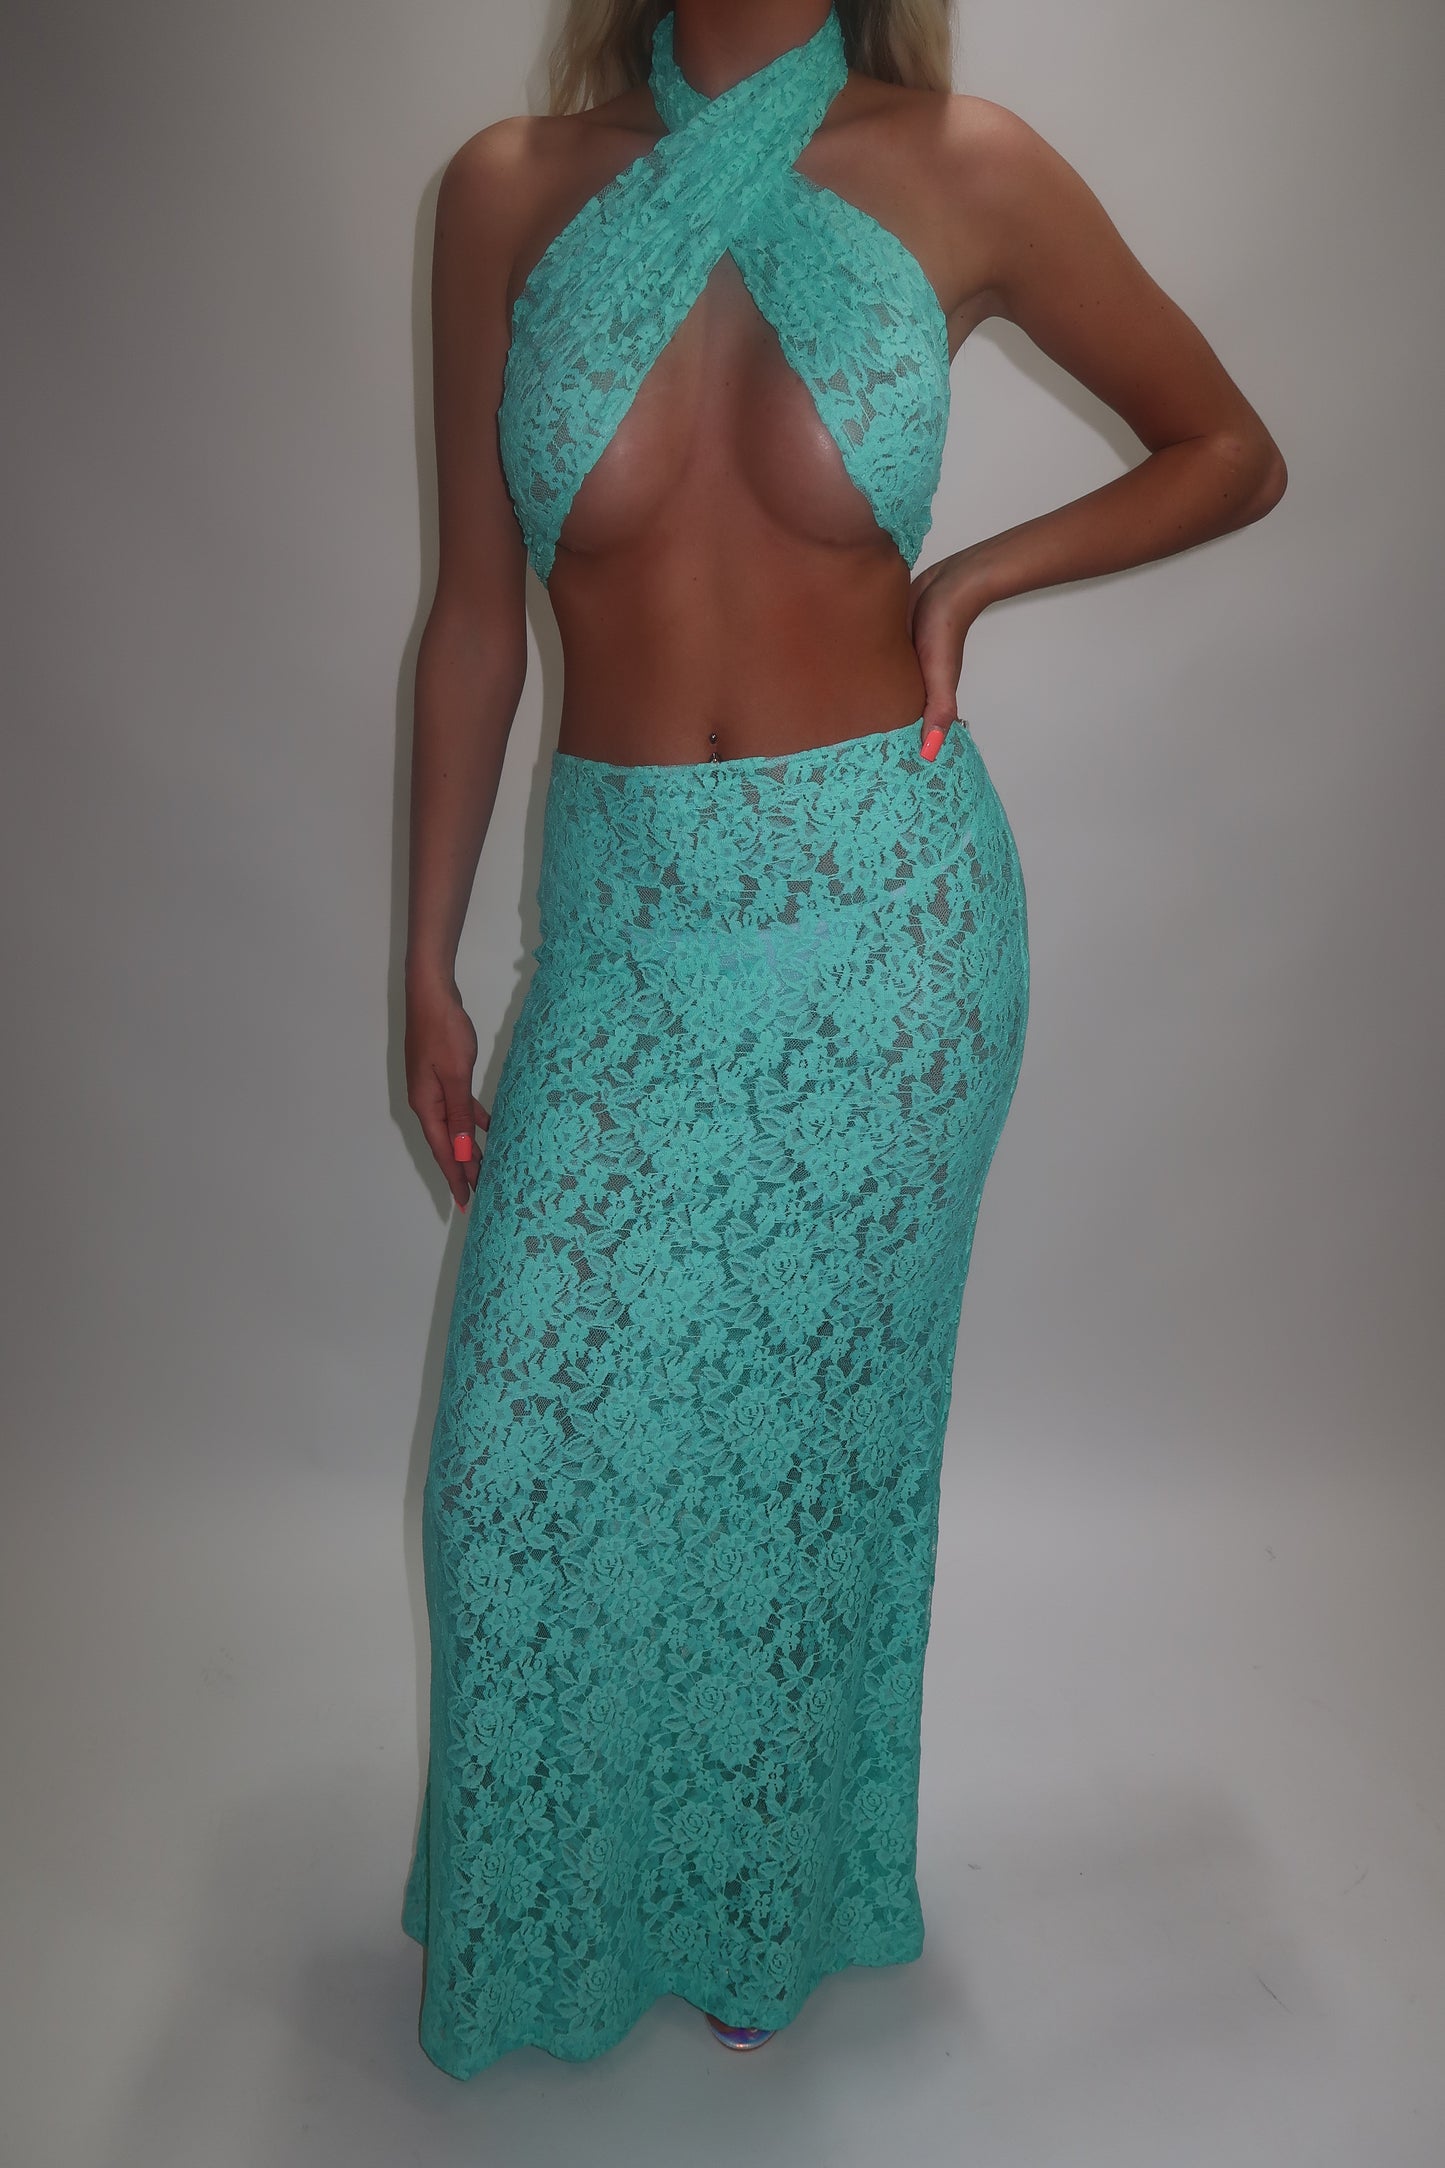 LIMITED EDITION HAND MADE AND DESIGNED IN HOUSE: ‘Ariel’ multi-way top and maxi skirt co-odd